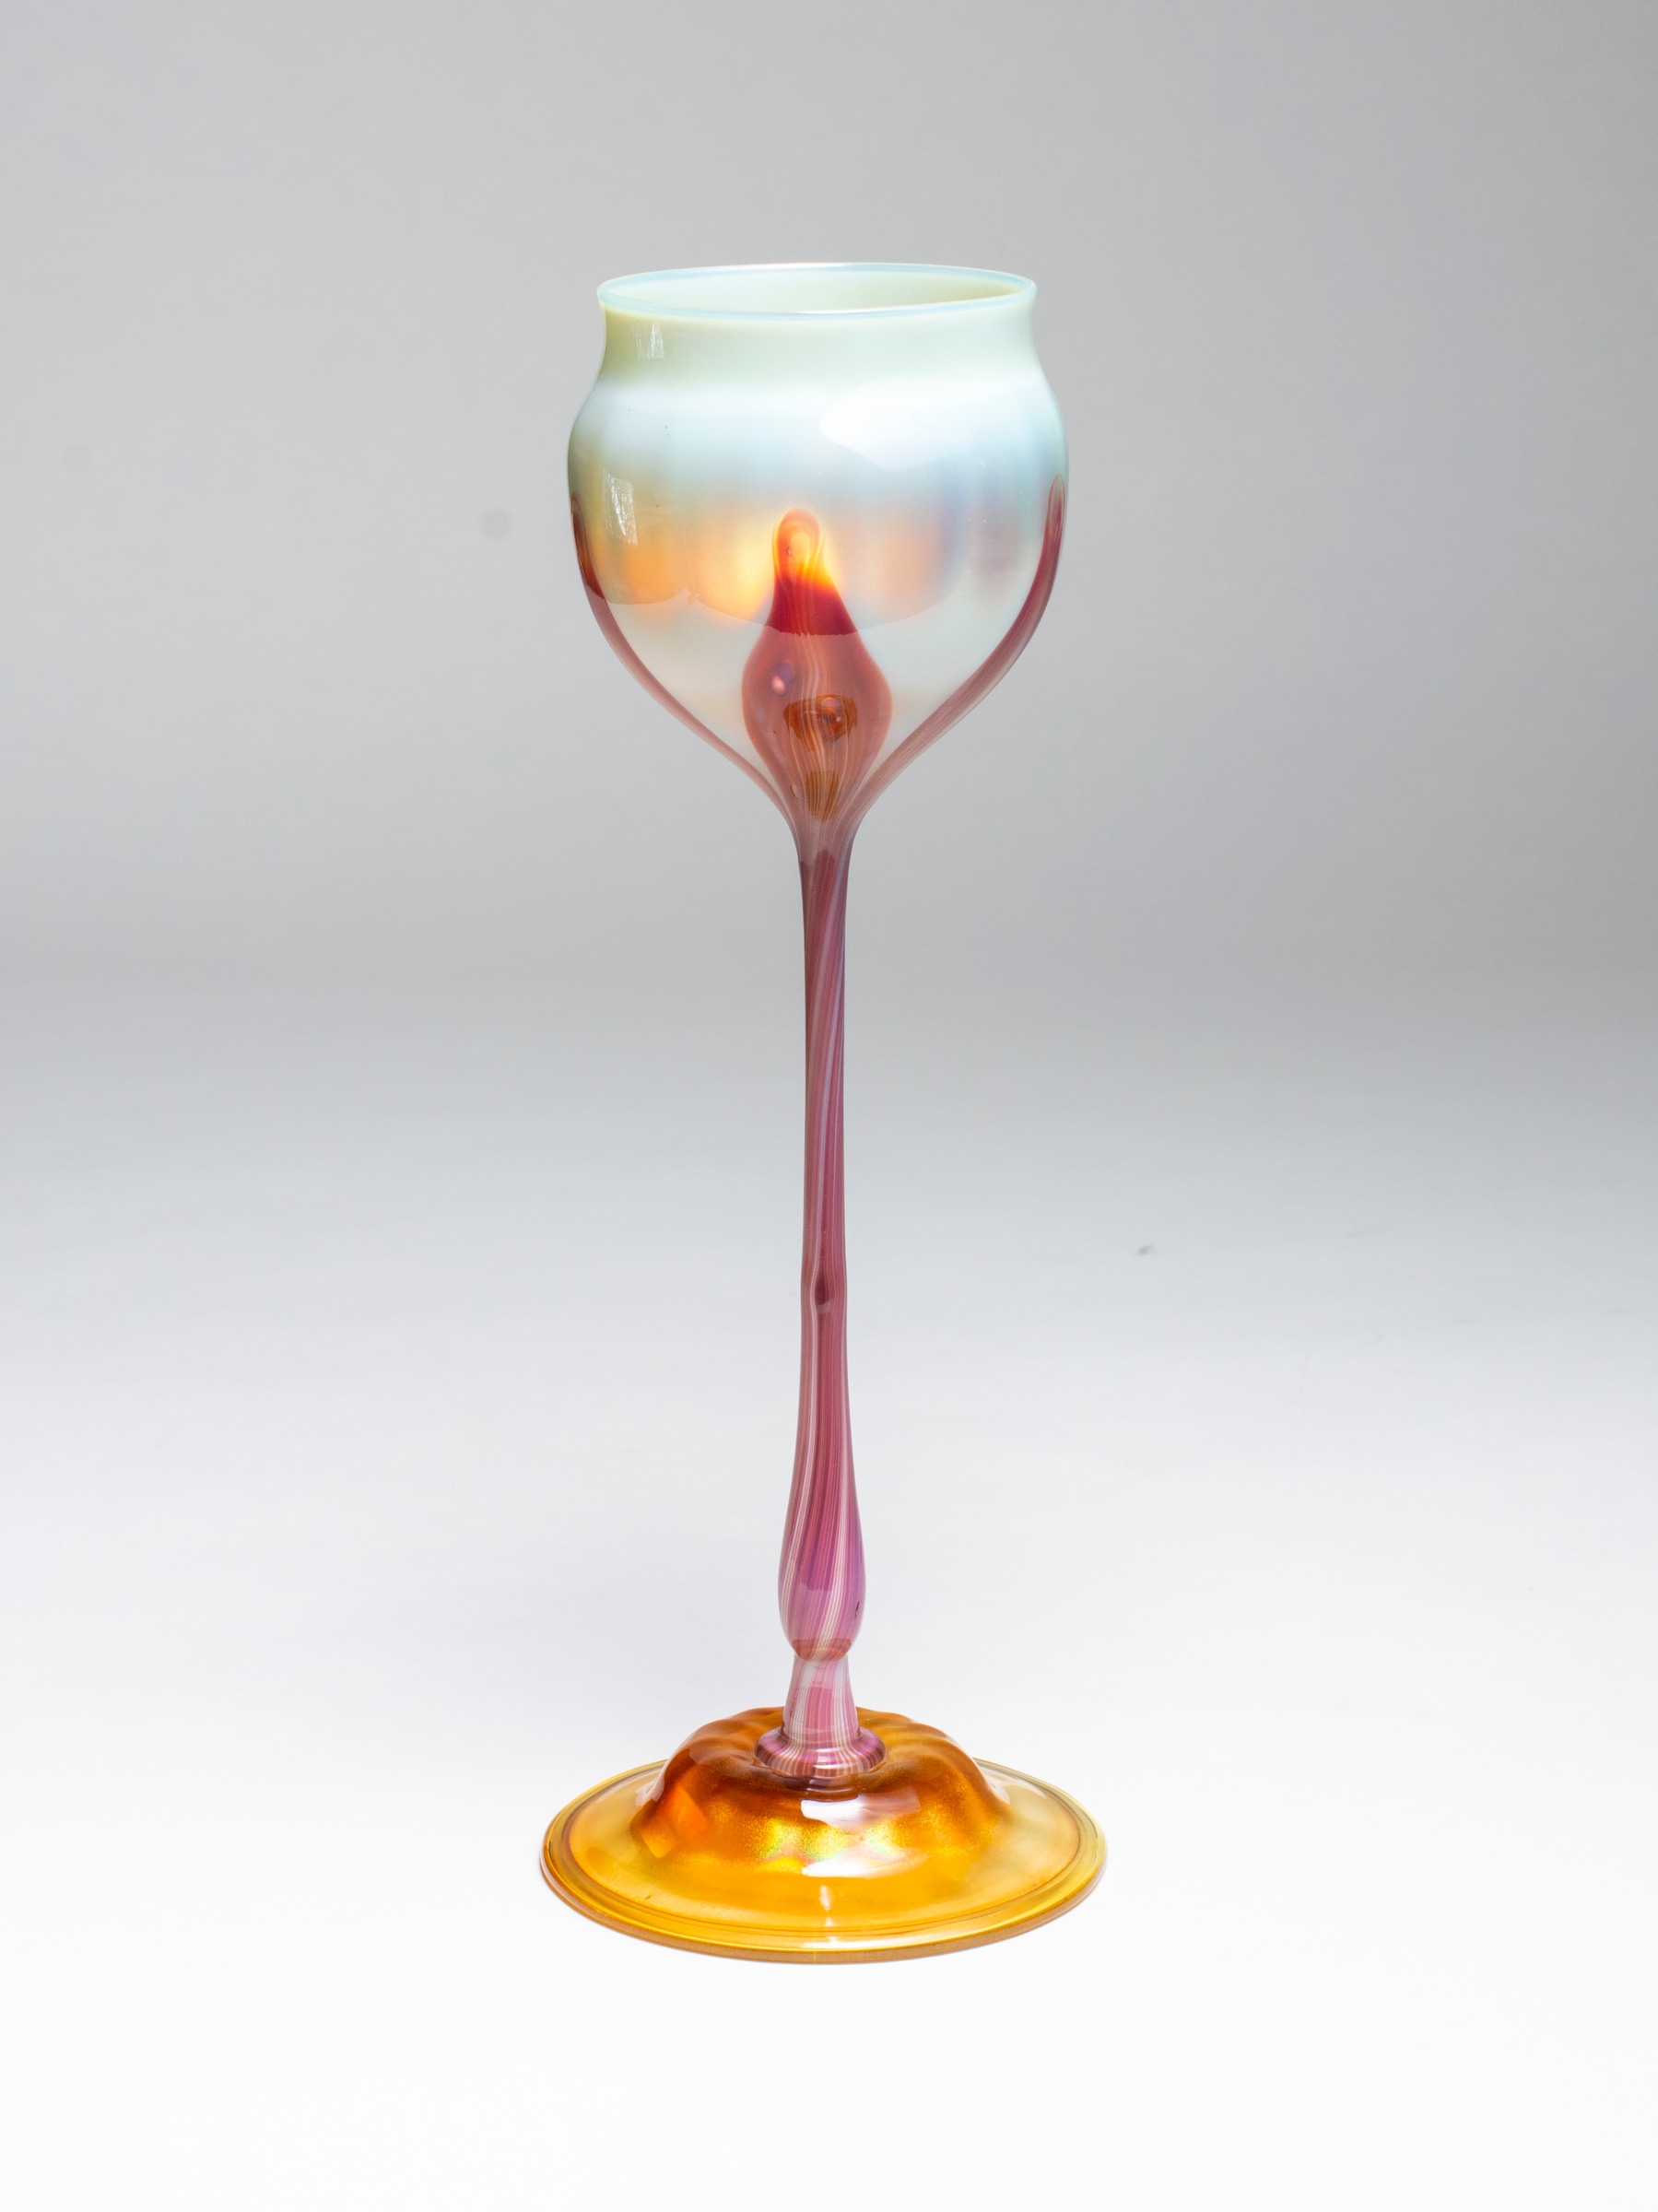 an early tiffany favrile glass flower form, the creamy white flower cup supported by a stem of deep red glass, on a domed foot. red was an unusual and rare color in blown tiffany glass,